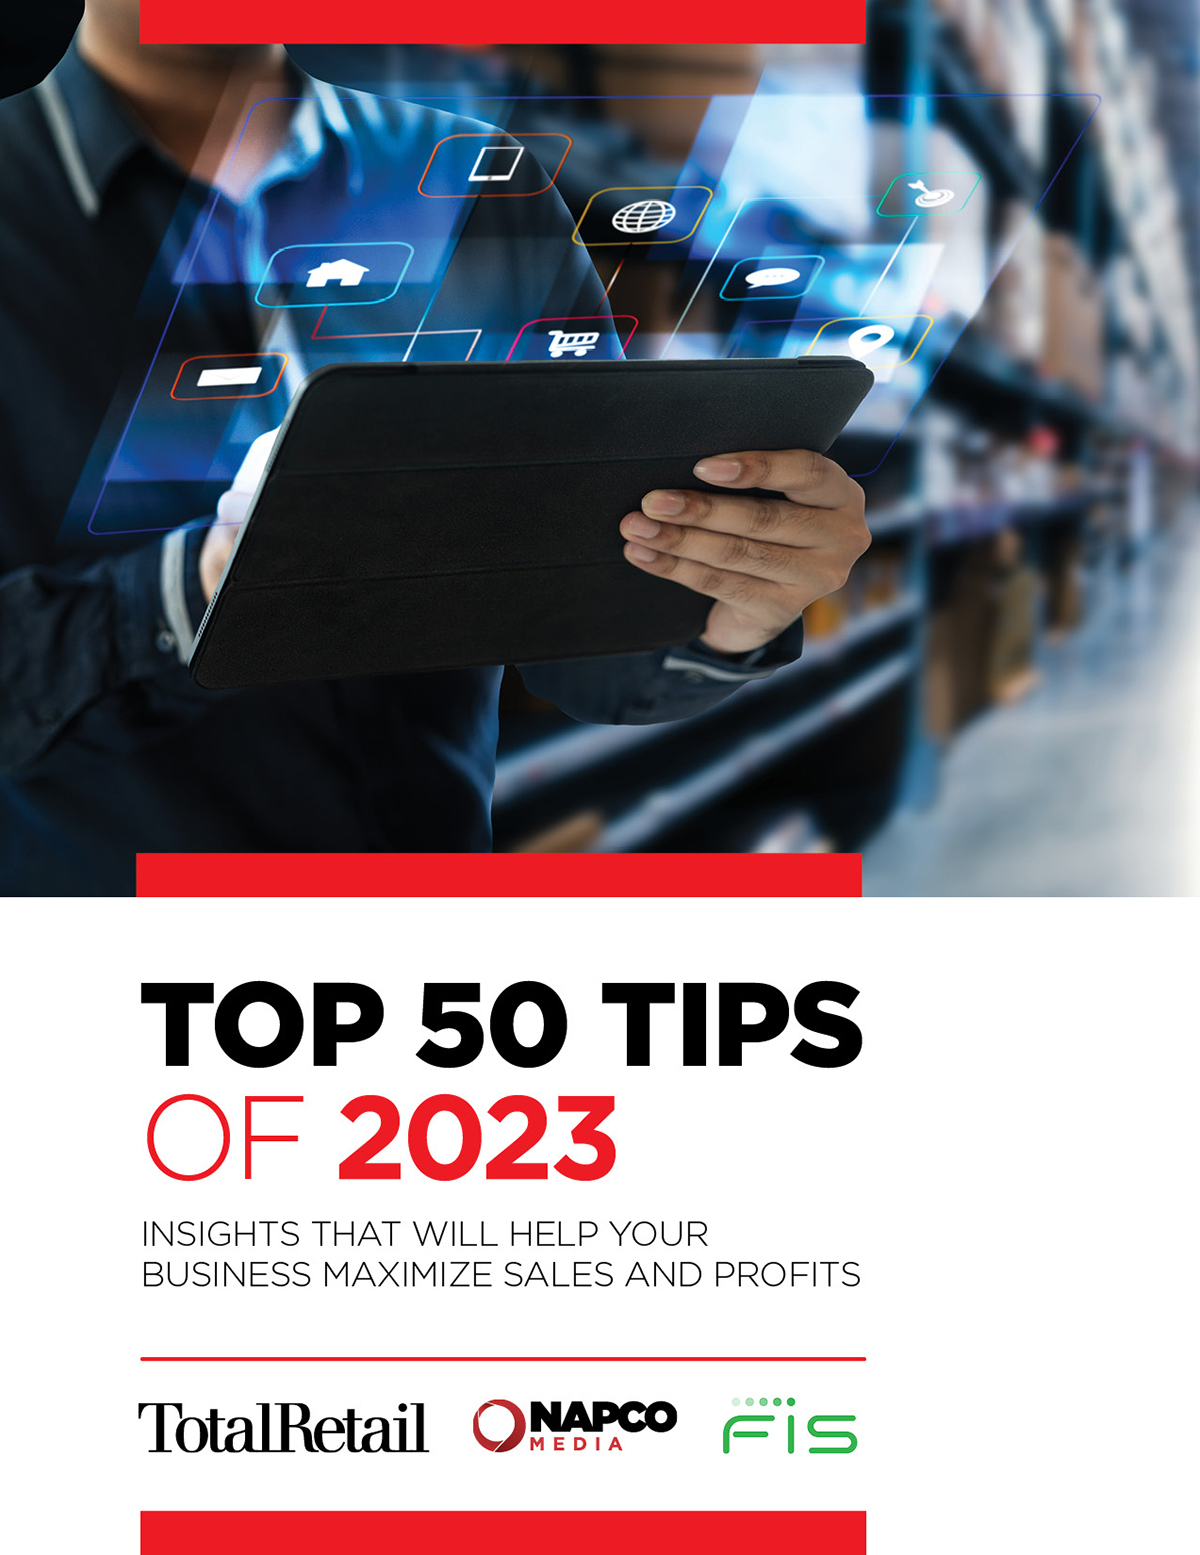 Total Retail Releases its Top 50 Tips of 2023 Report